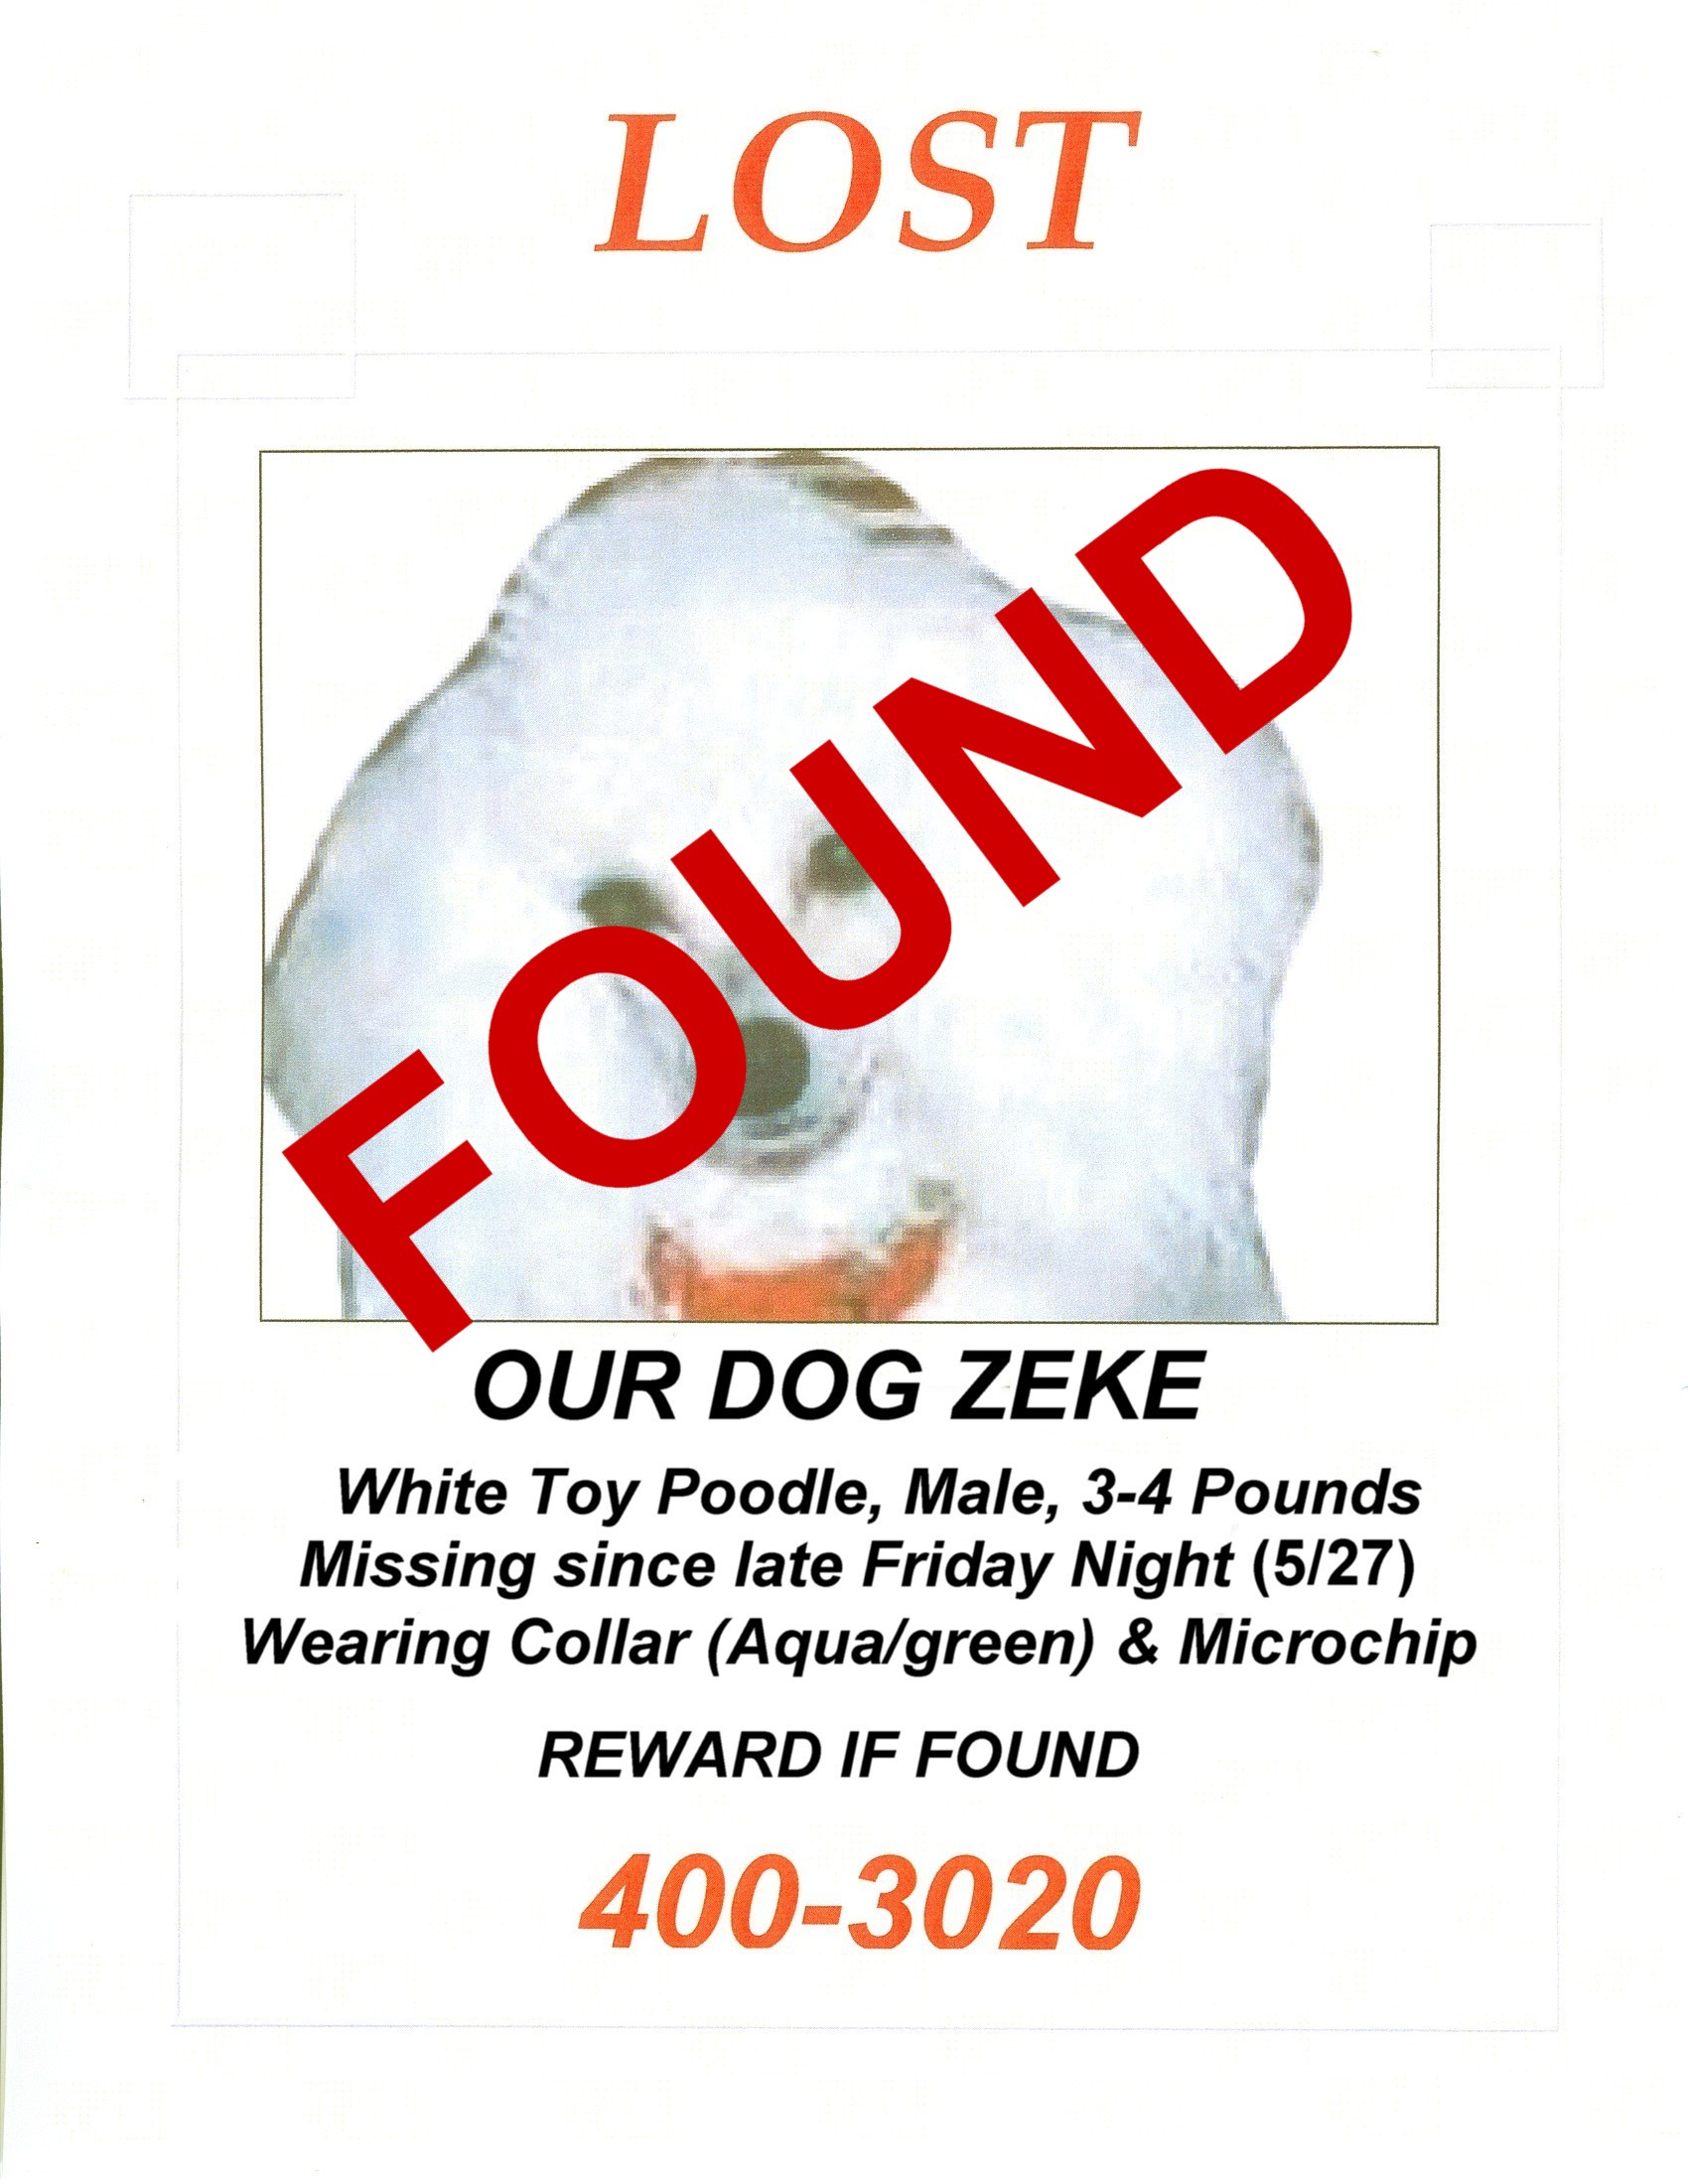 Found 5/28/2006 approx. 10:00 p.m.